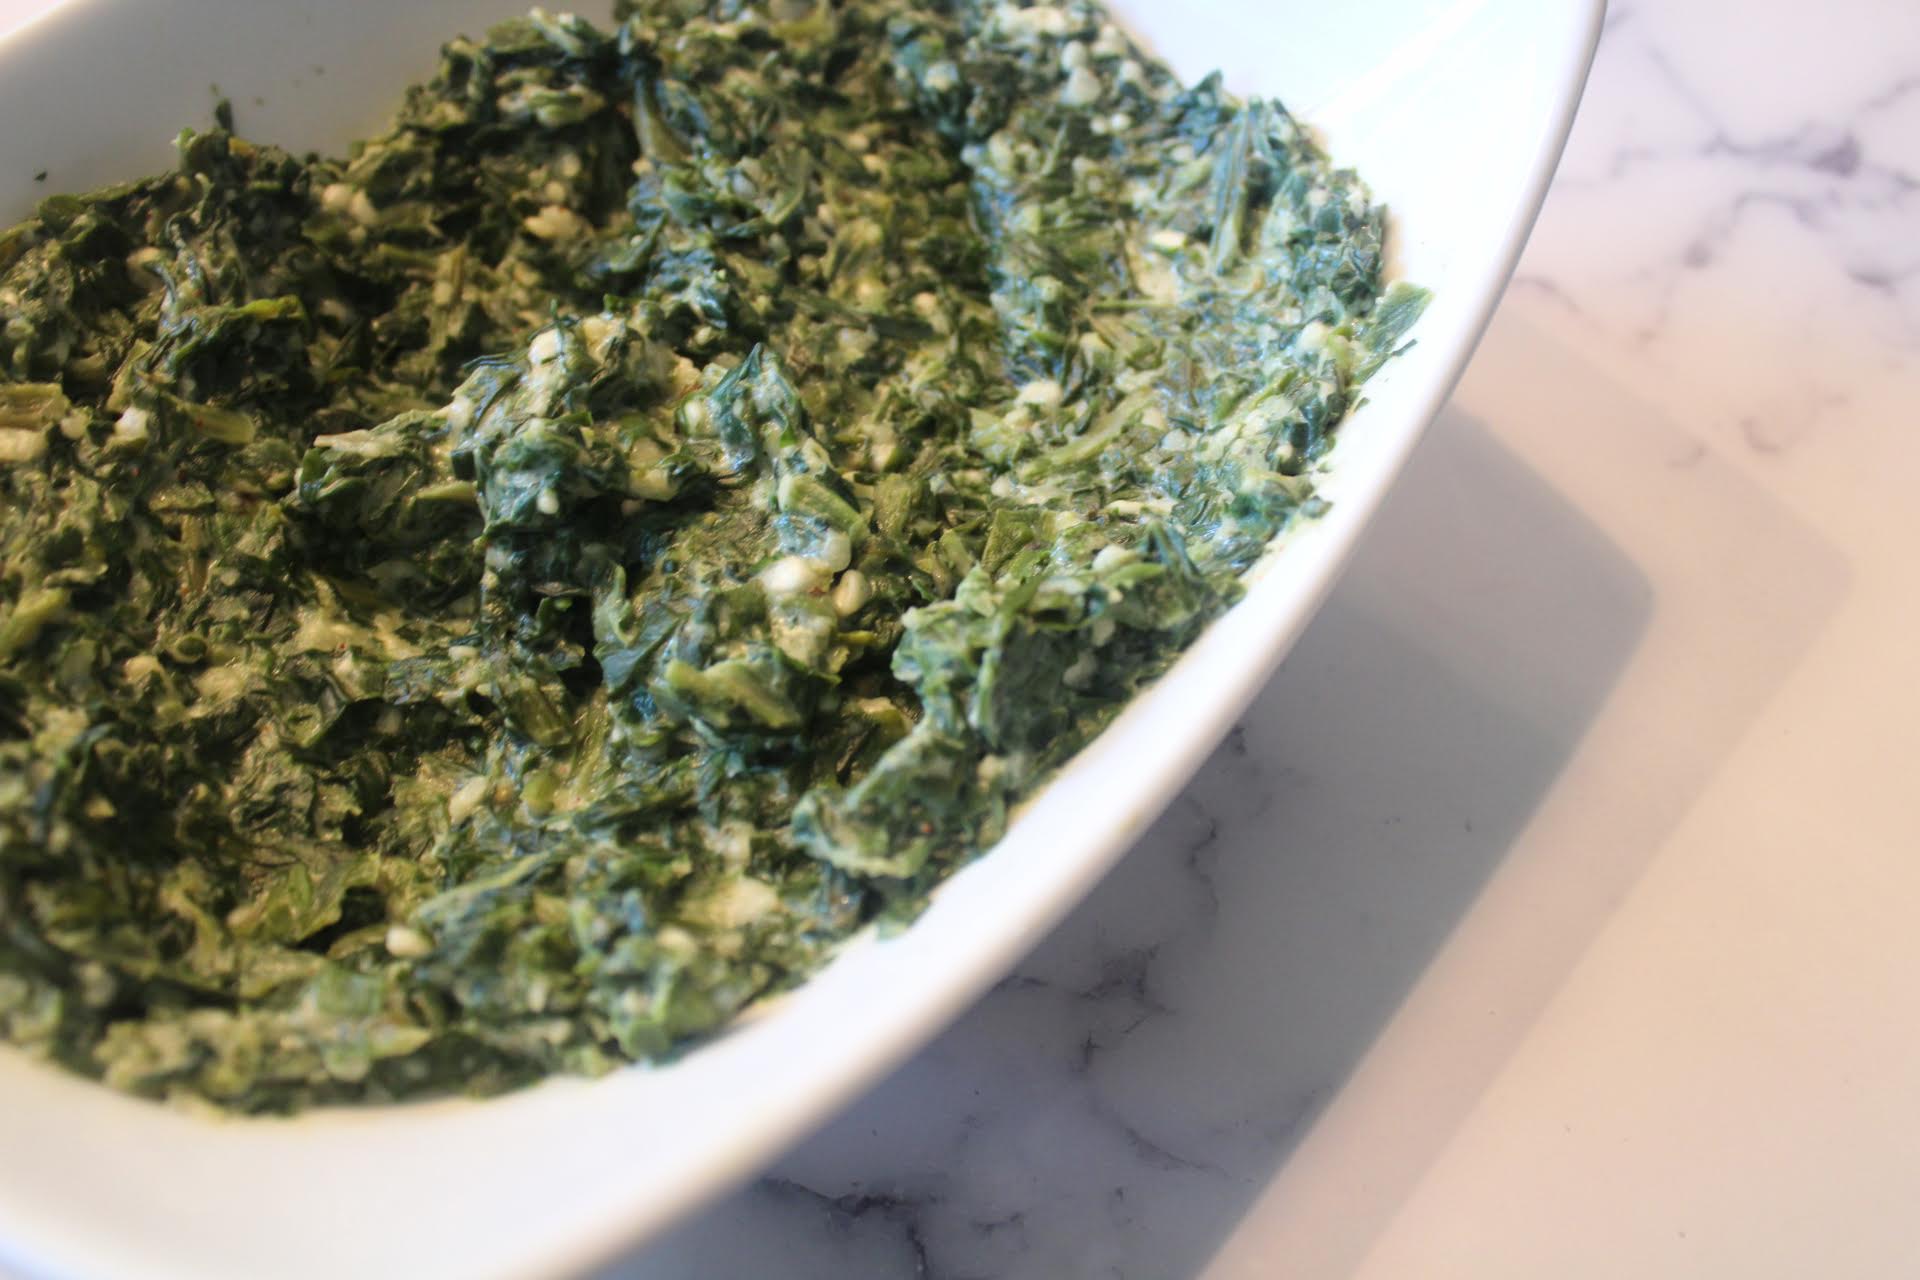 Steakhouse Style Creamed Spinach